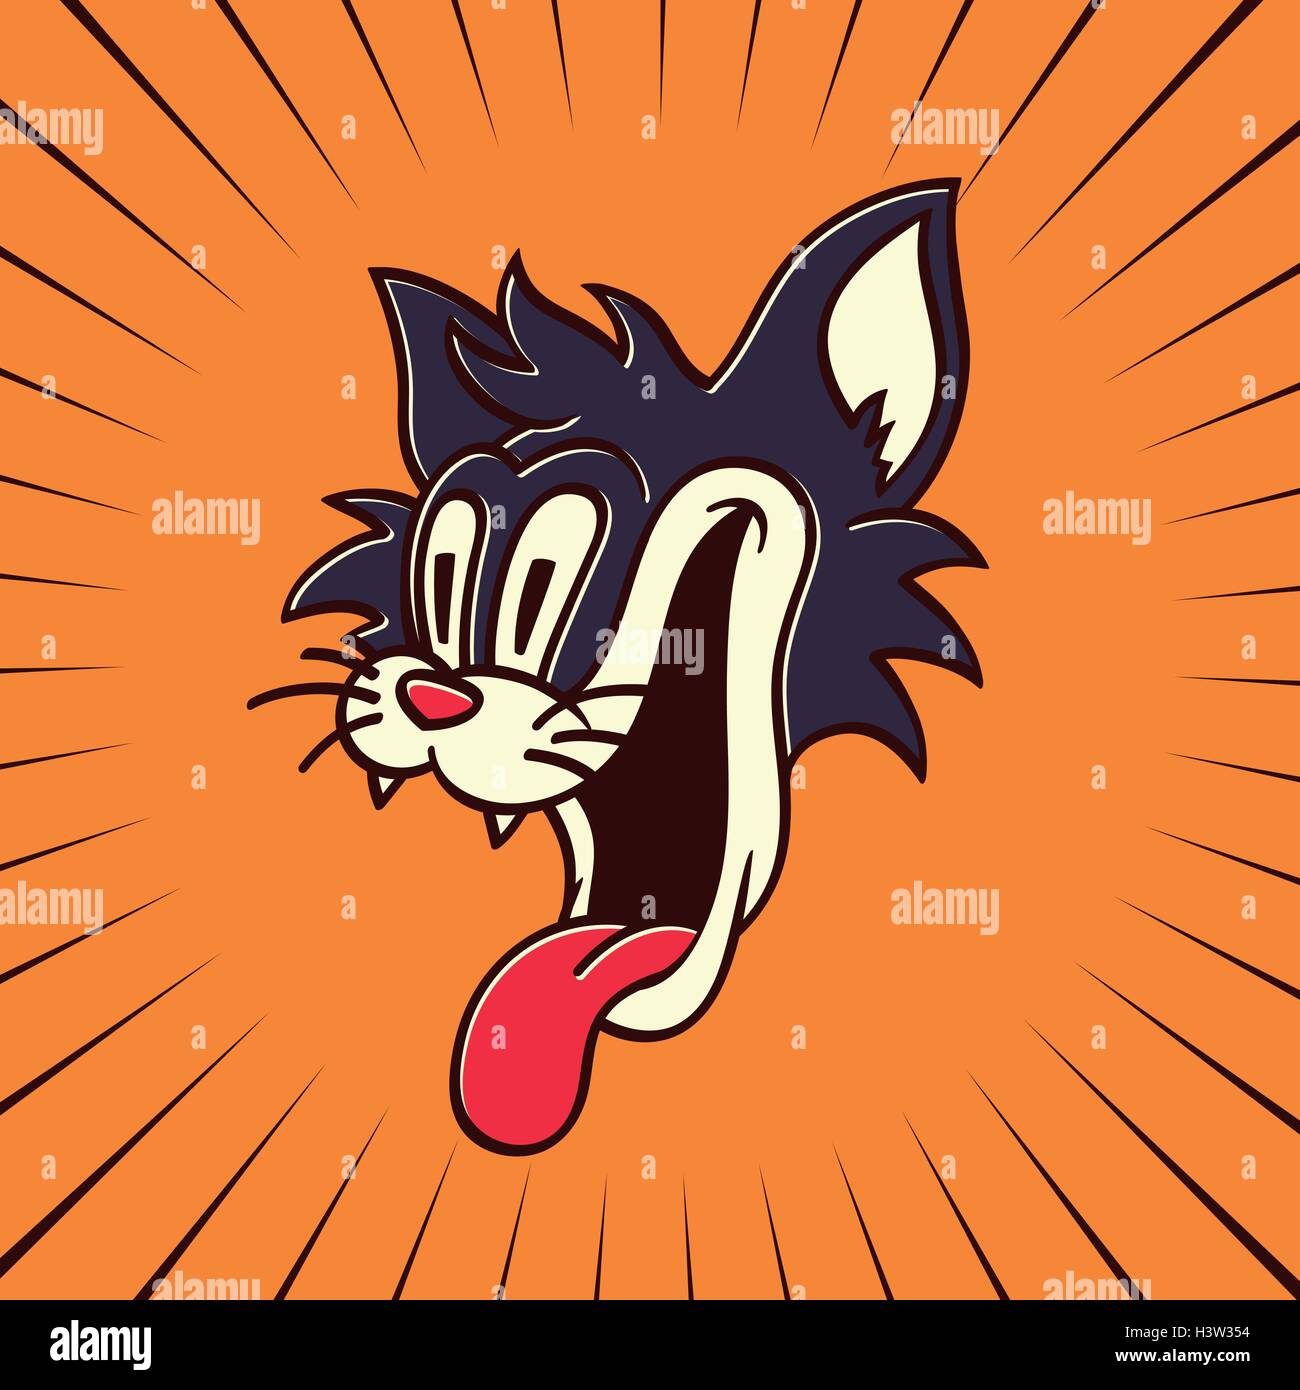 vintage toons: retro cartoon character hungry crazy cat smiling with tongue out looking at something delicious Stock Vector